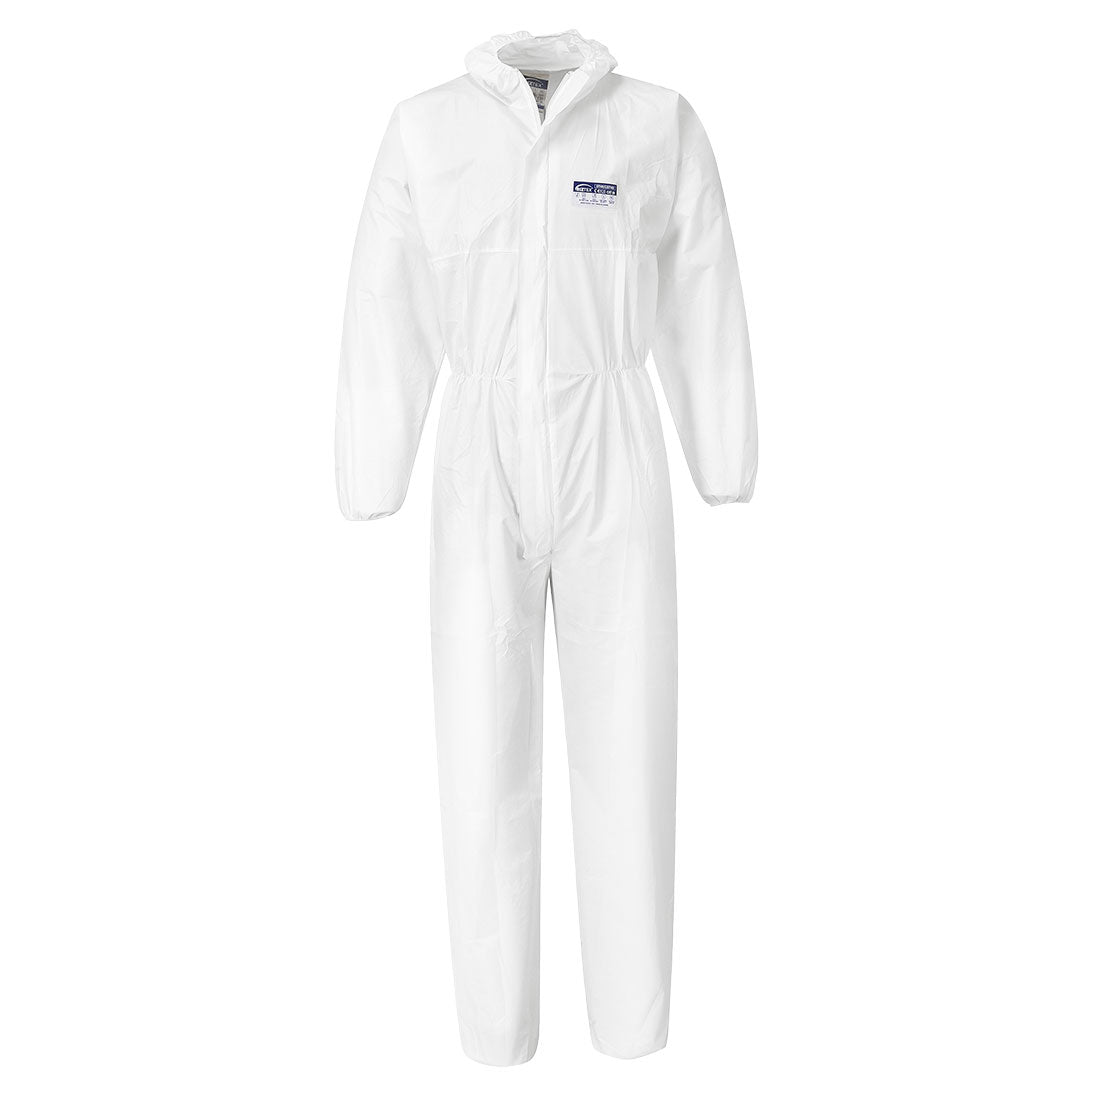 Disposable white Coverall PP/PE 65g 50pcs- ST40